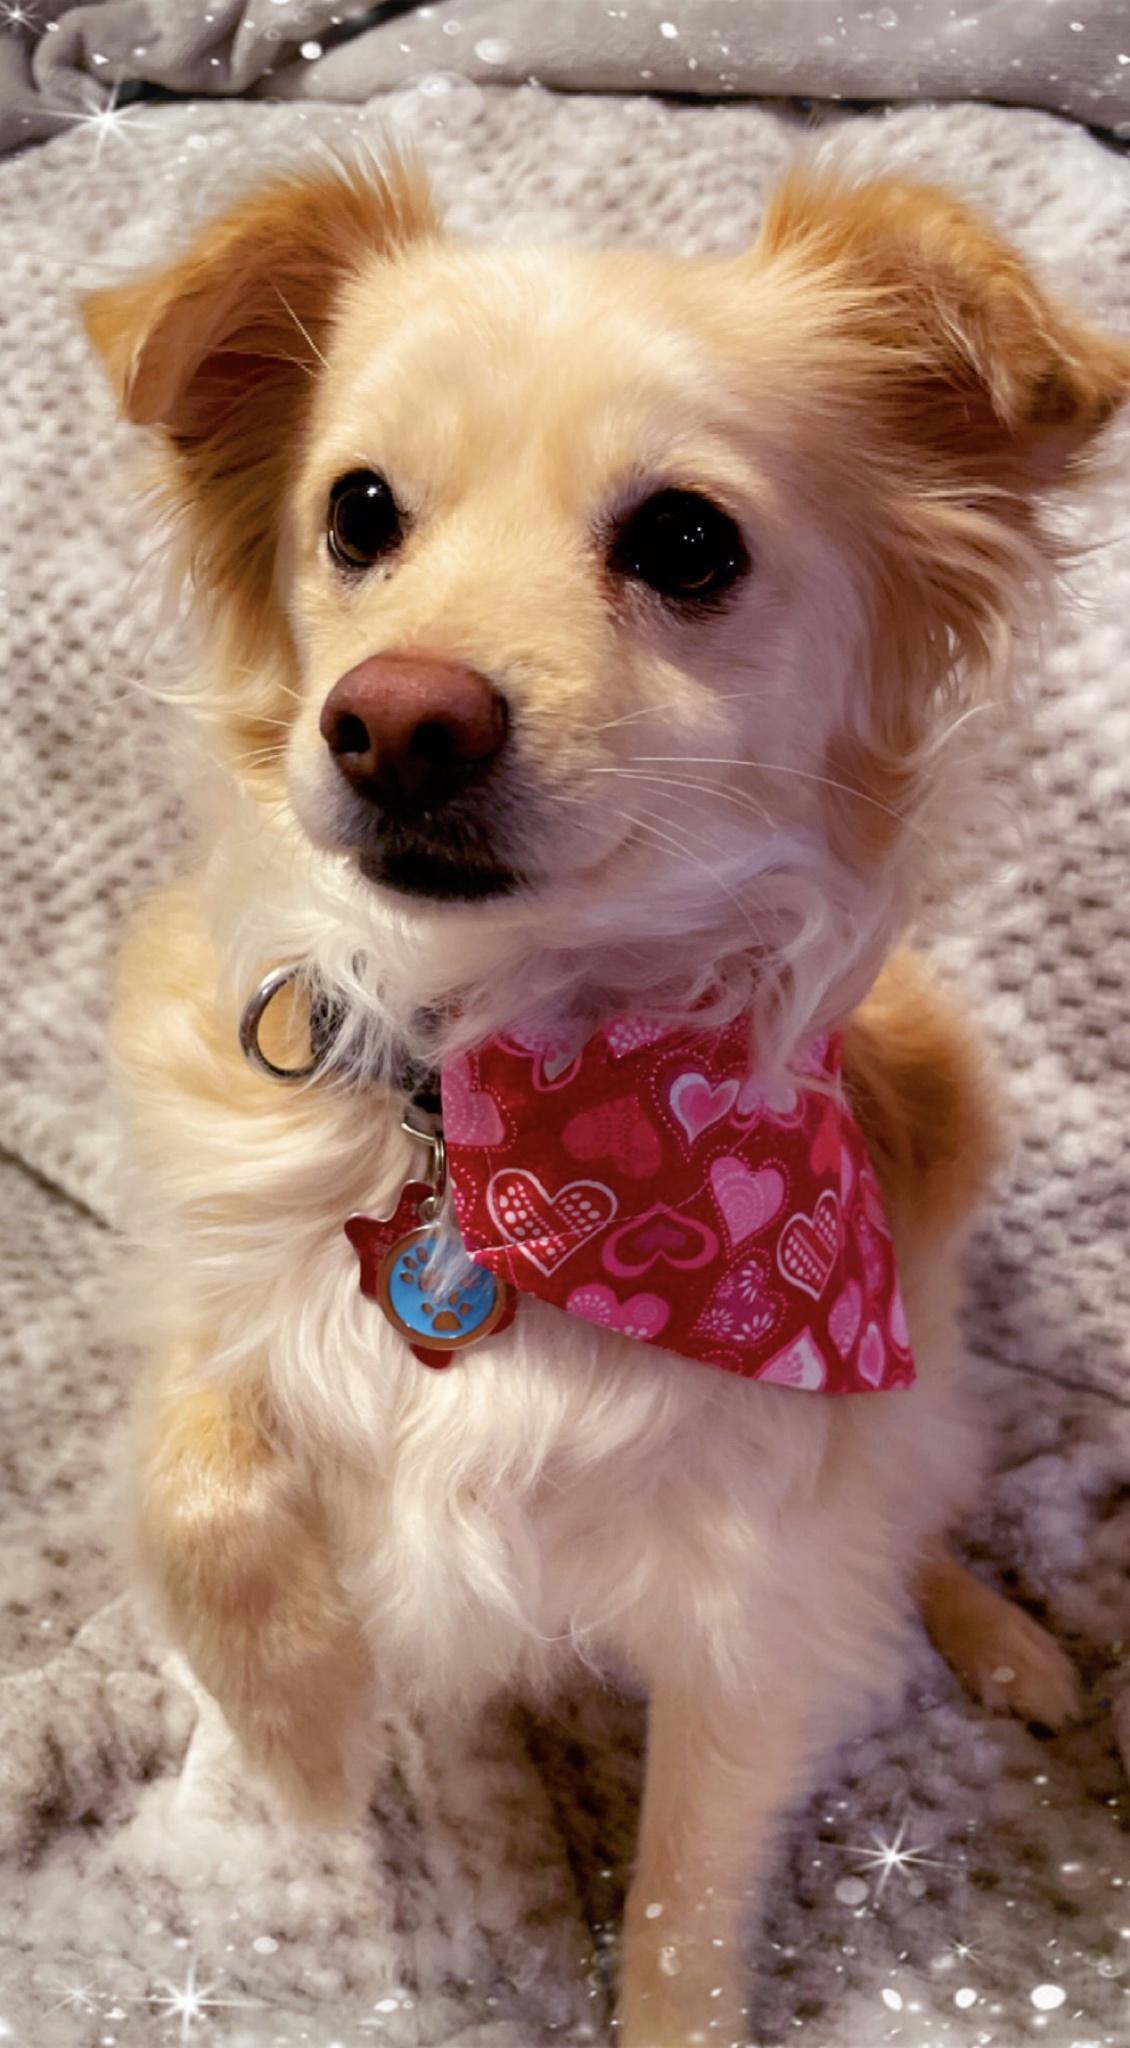 Remy would possibly maybe be your Valentine